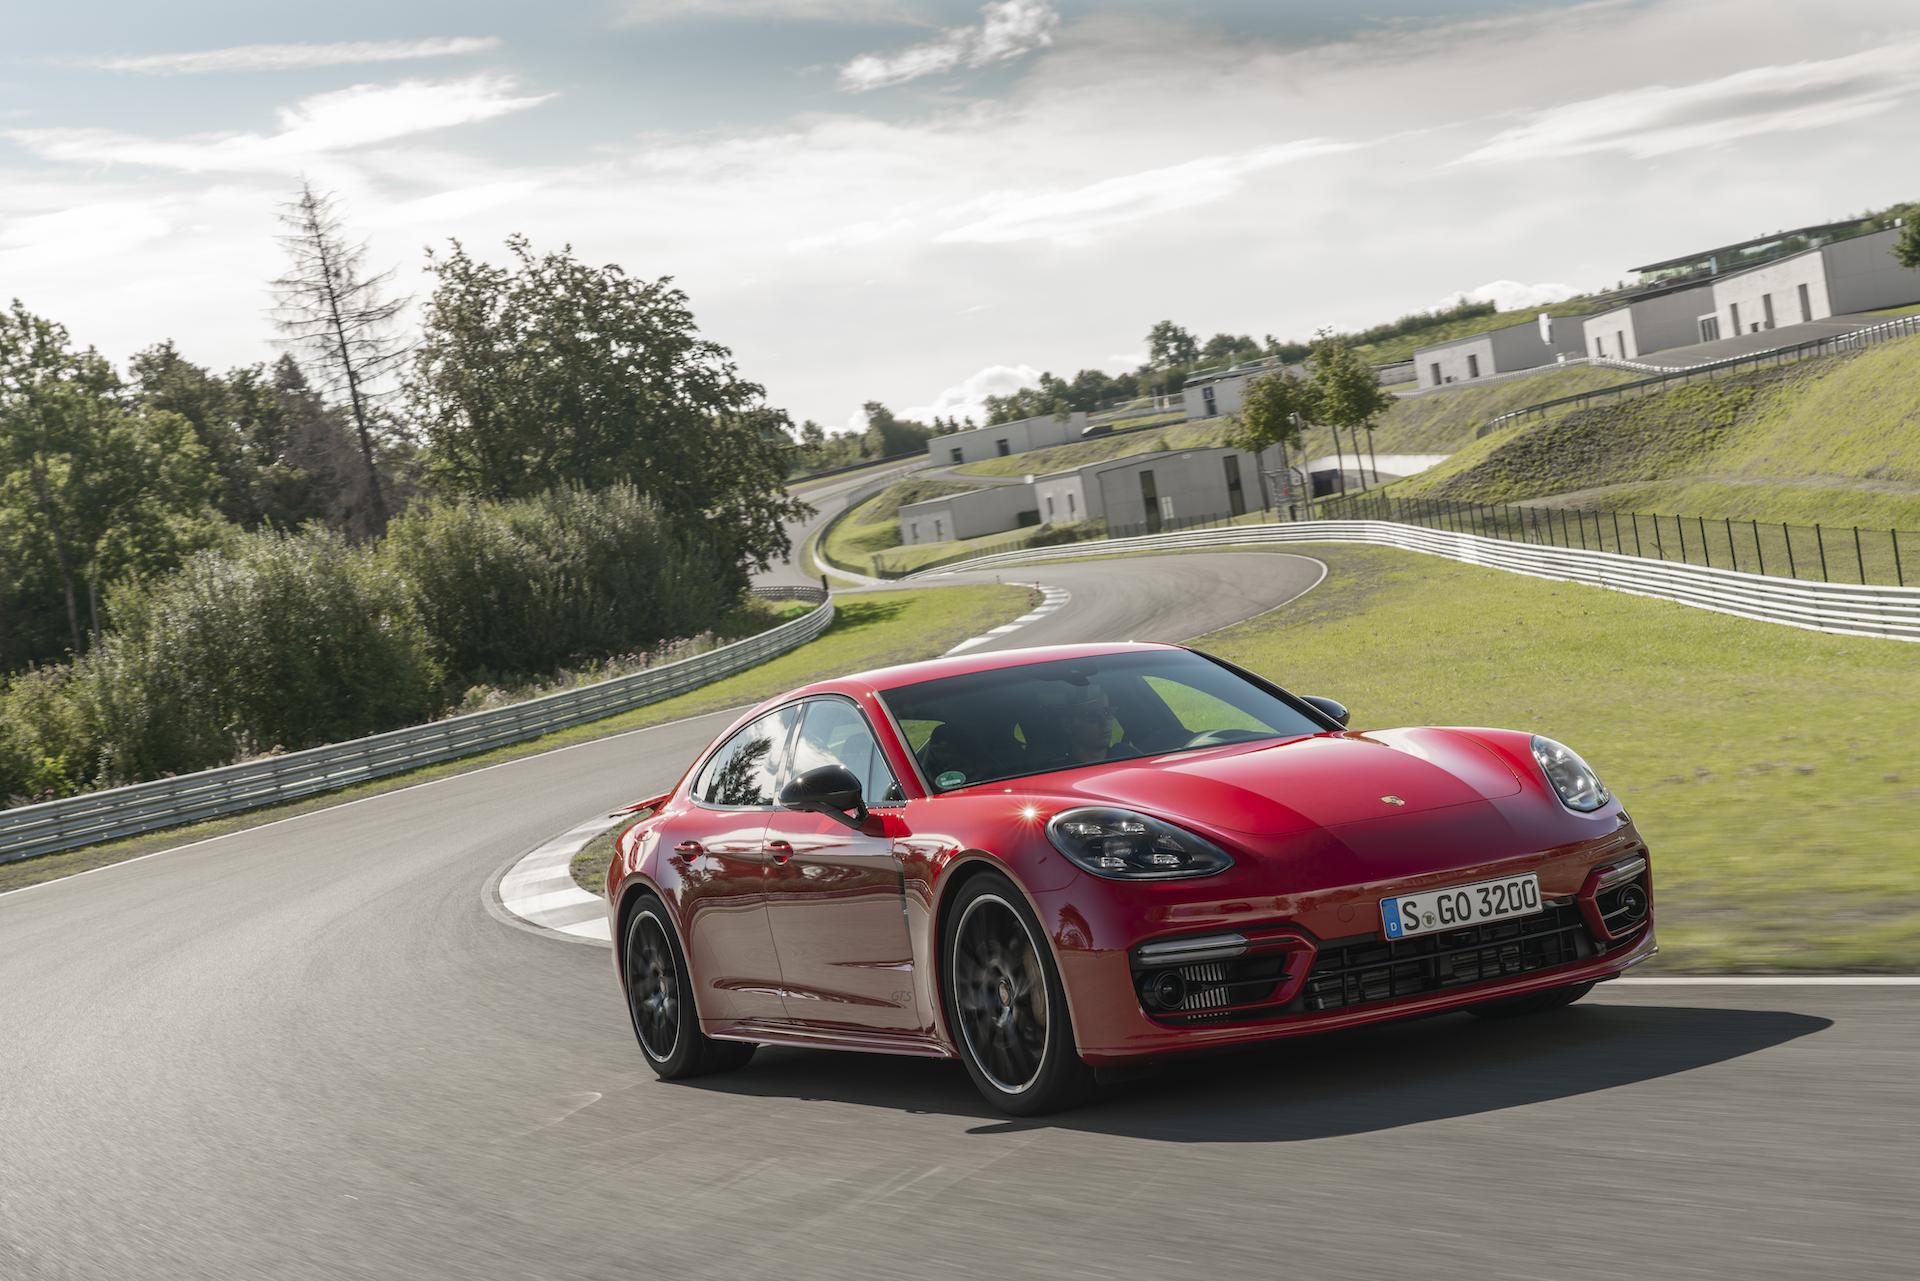 2023 Porsche Panamera Prices, Reviews, and Pictures